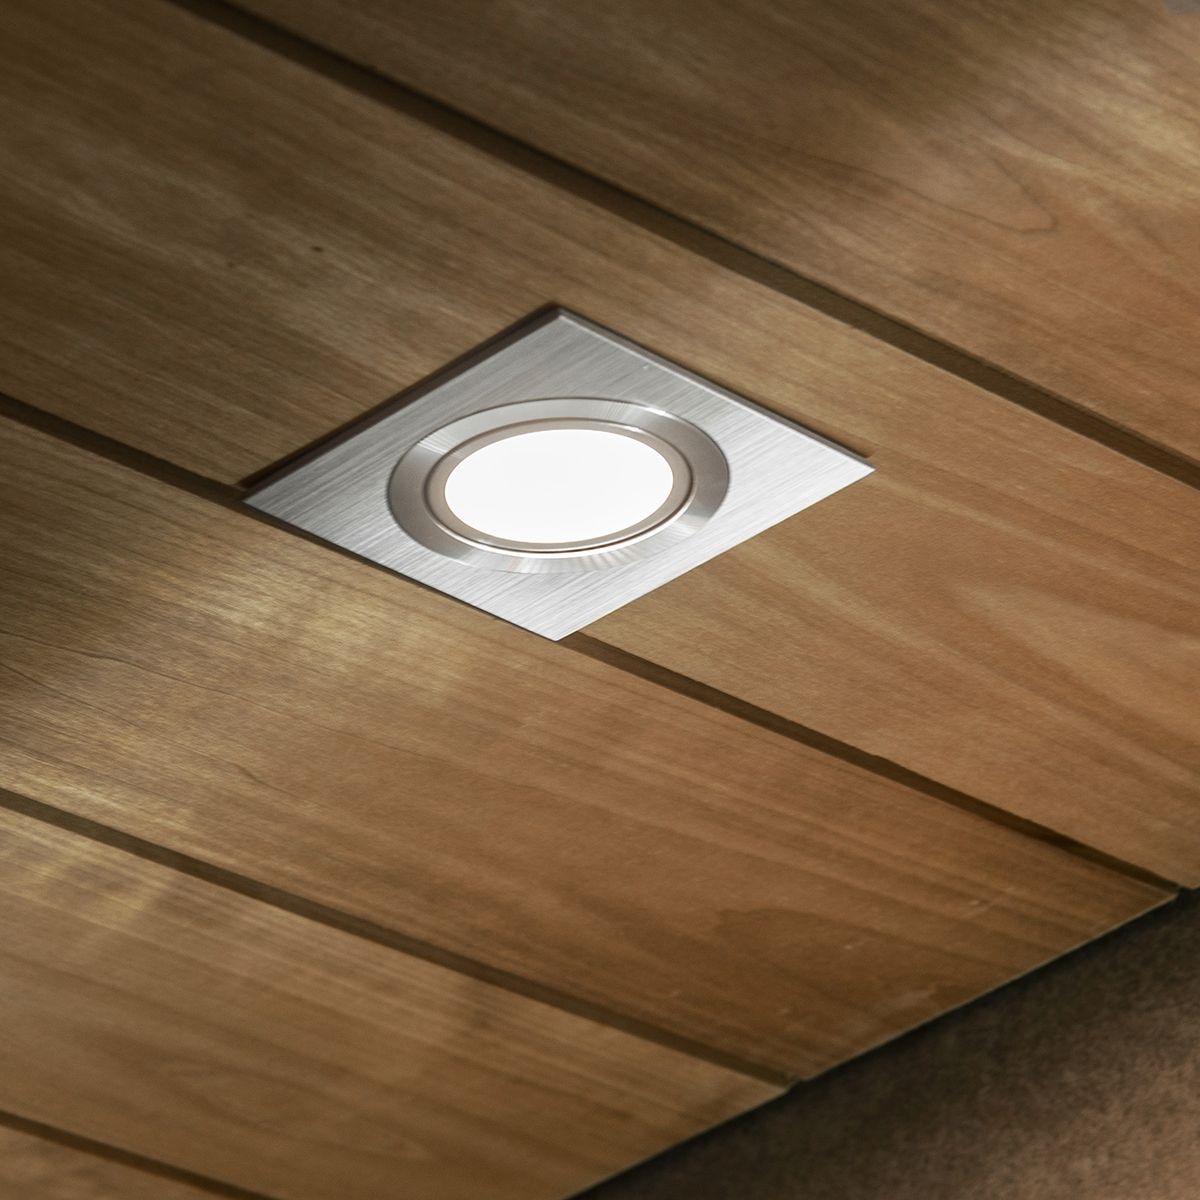 Efficient LED Square Spots from Finnish Company - Illuminate Your Space